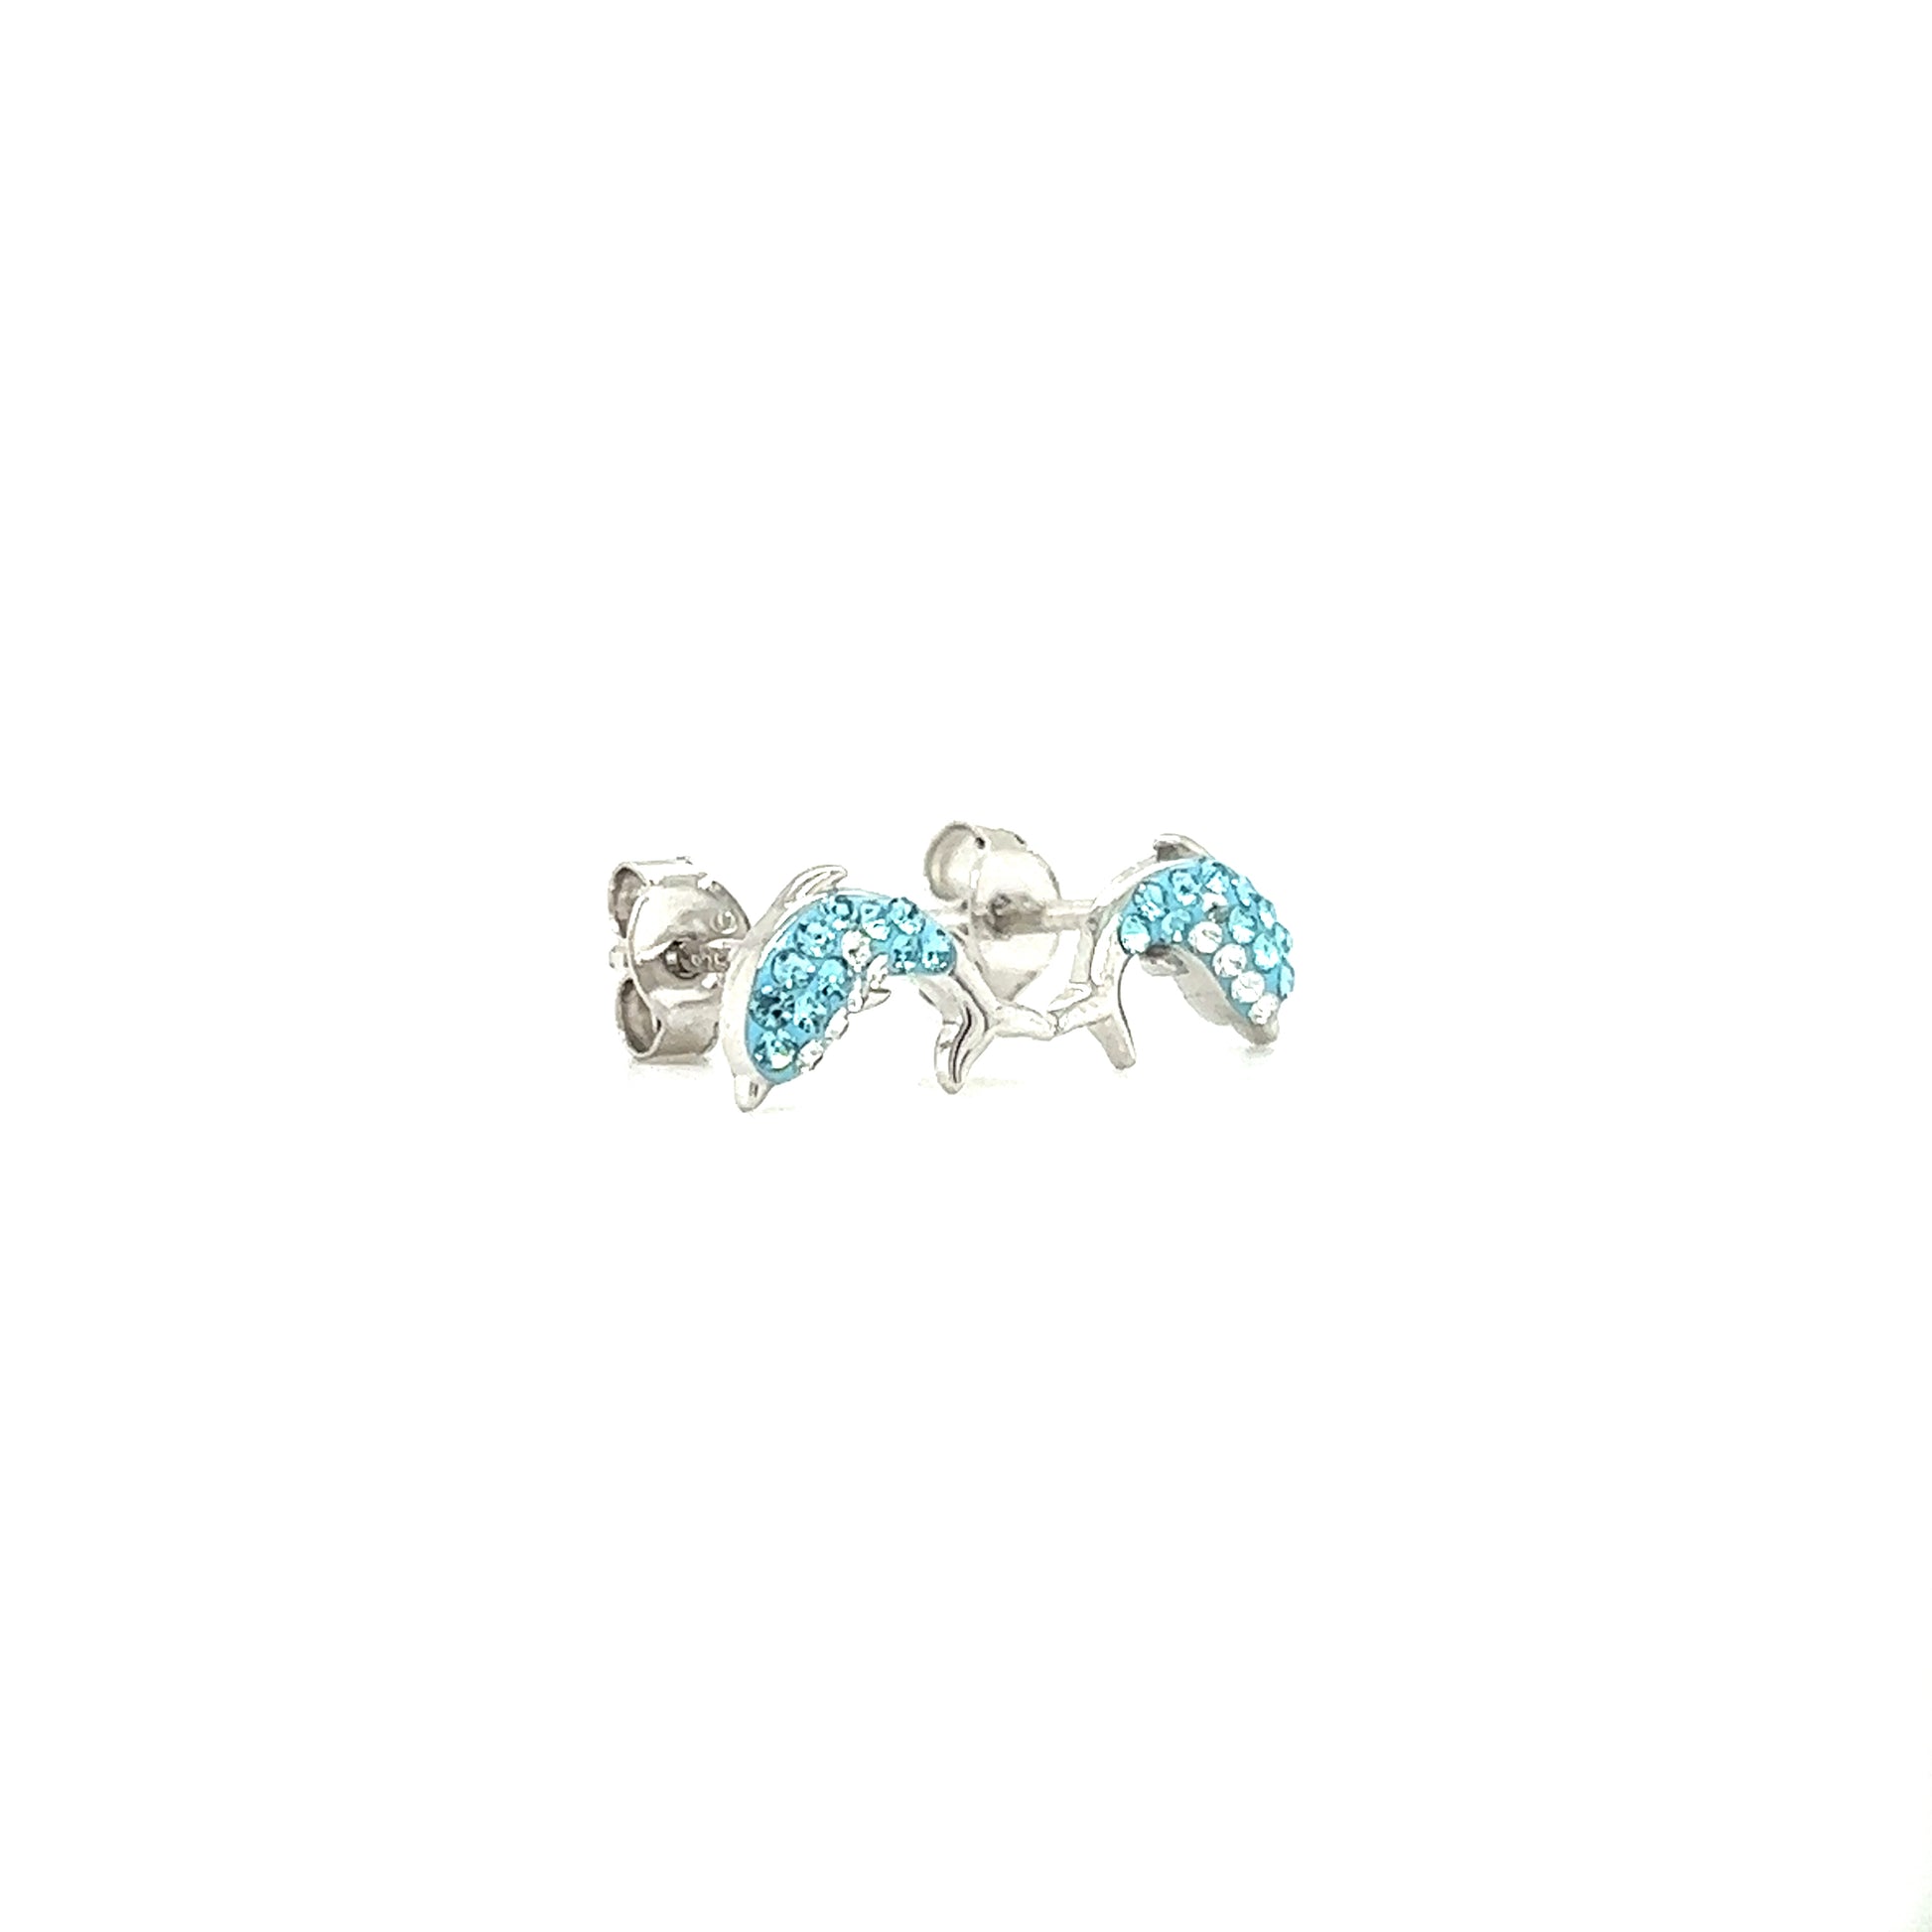 Dolphin Stud Earrings with Aqua and White Crystals in Sterling Silver Left Side View